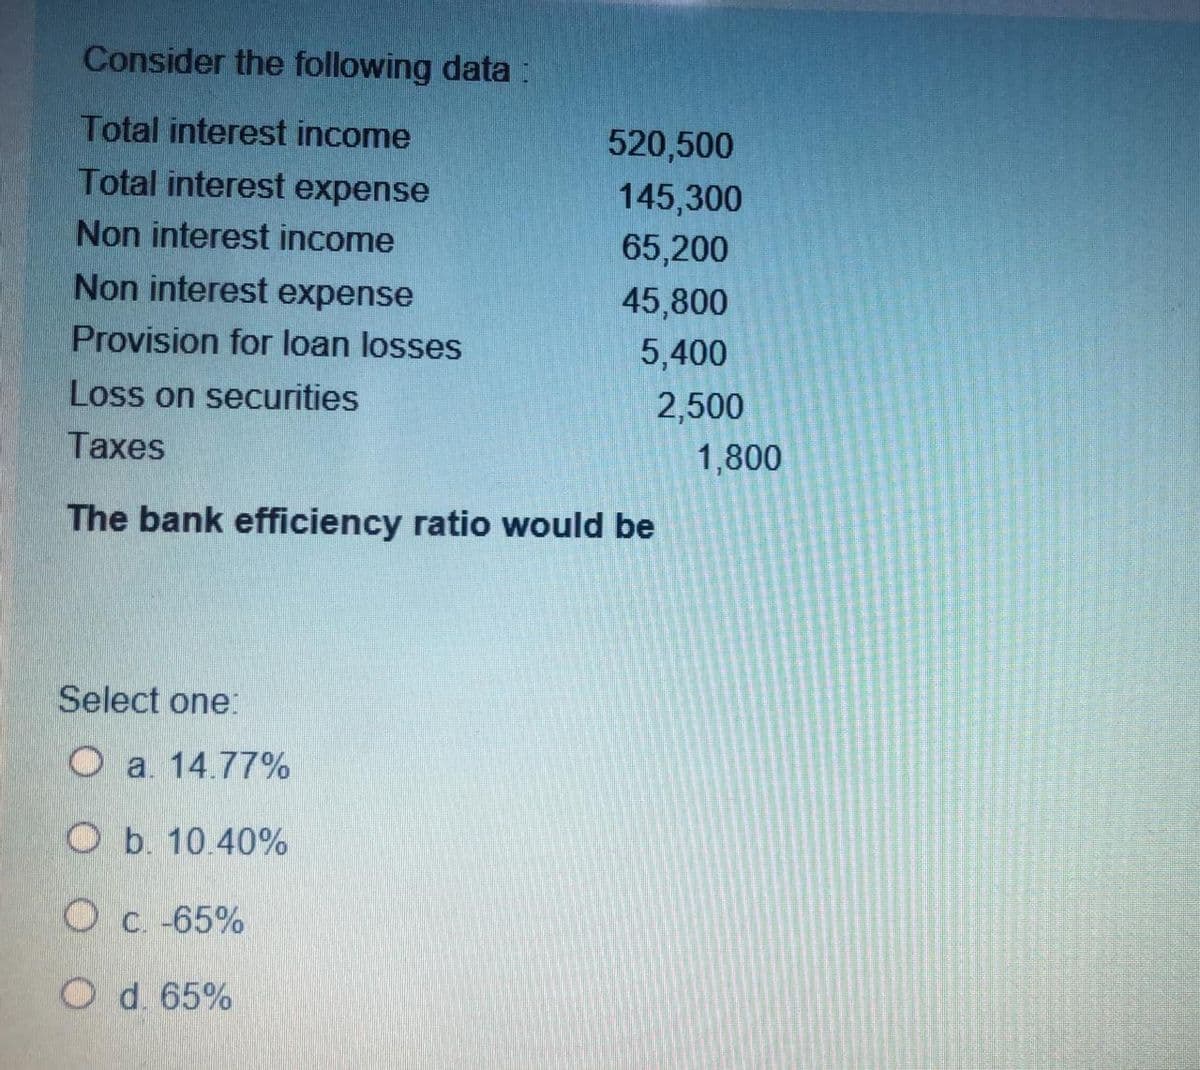 Consider the following data :
Total interest income
520,500
Total interest expense
145,300
Non interest income
65,200
Non interest expense
45,800
Provision for loan losses
5,400
Loss on securities
2,500
Taxes
1,800
The bank efficiency ratio would be
Select one:
O a. 14.77%
O b. 10.40%
O c. -65%
O d. 65%
